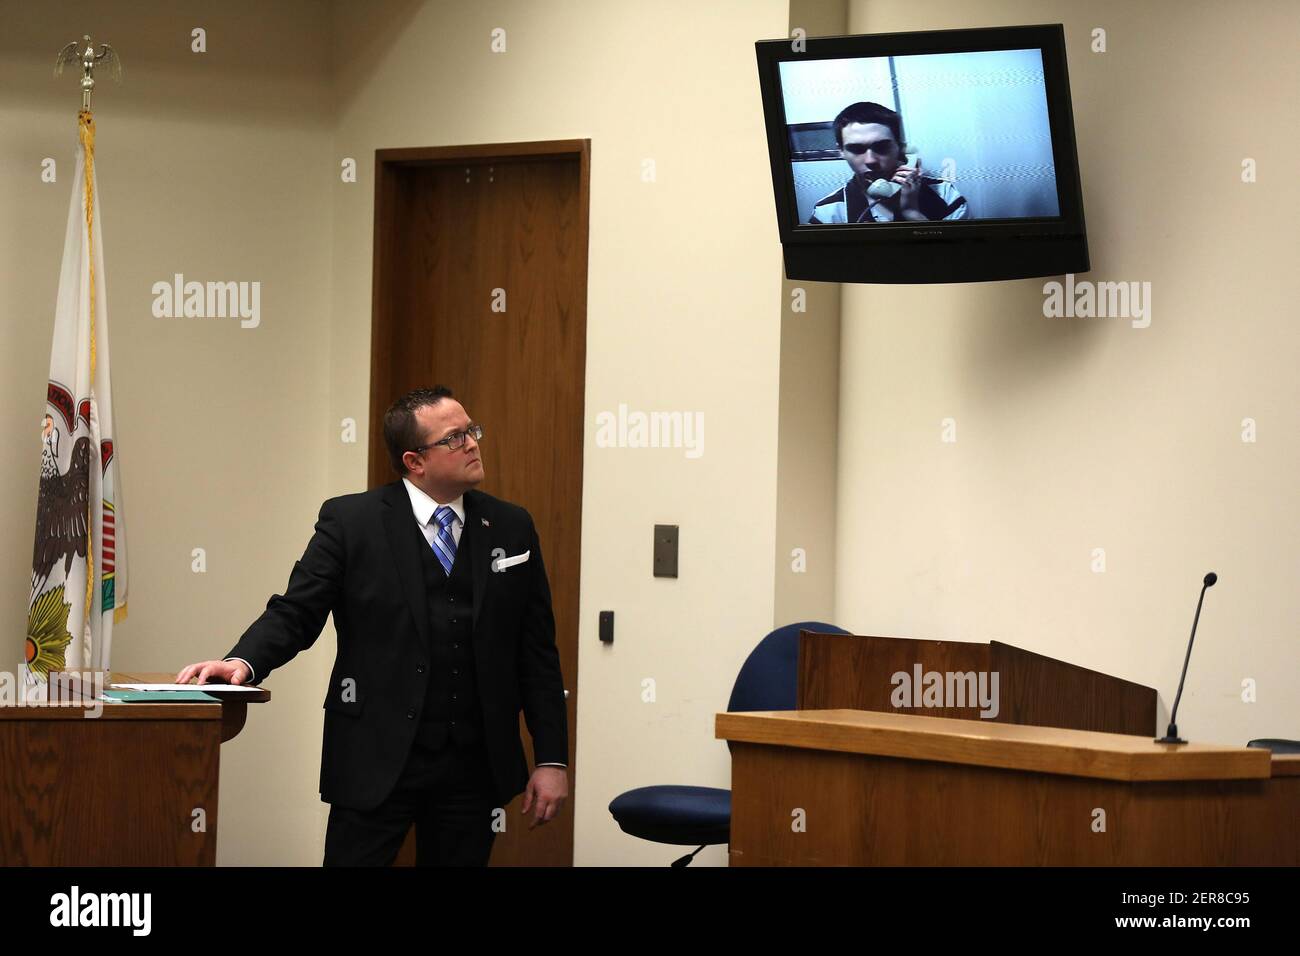 Lee County State's Attorney Matthew T. Klahn looks on as accused gunman Matthew Milby, making his appearance via video, is arraigned at the Lee County Courts Building in Dixon, Ill., on Friday, May 18, 2018. (Photo by Terrence Antonio James/Chicago Tribune/TNS/Sipa USA) Stock Photo